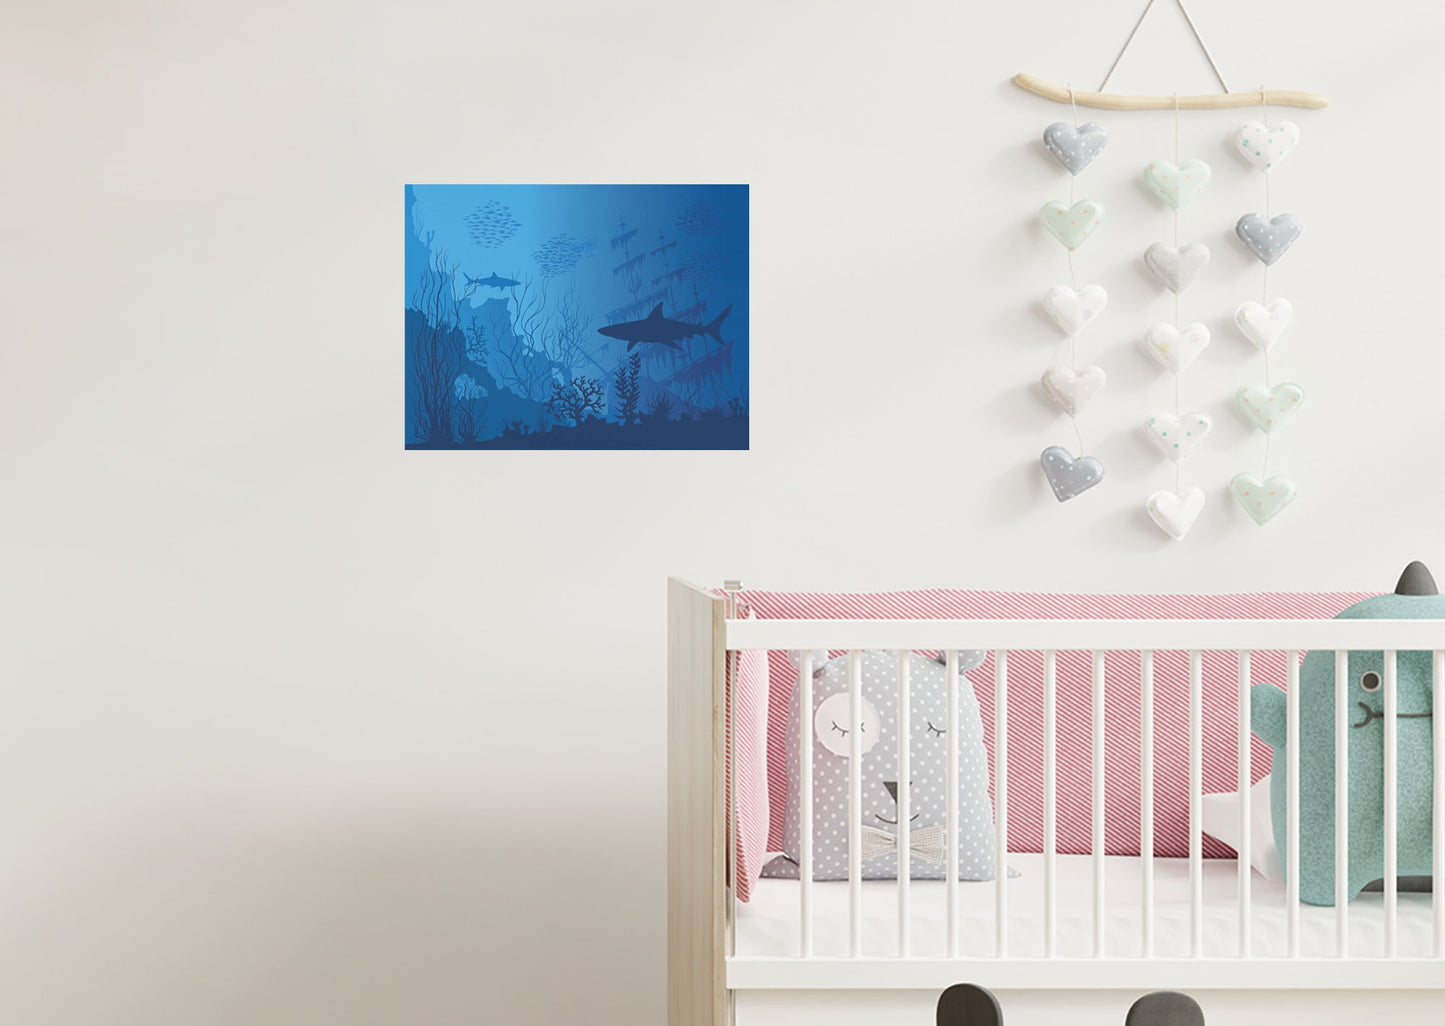 Nursery:  Shipwrecked        -   Removable Wall   Adhesive Decal